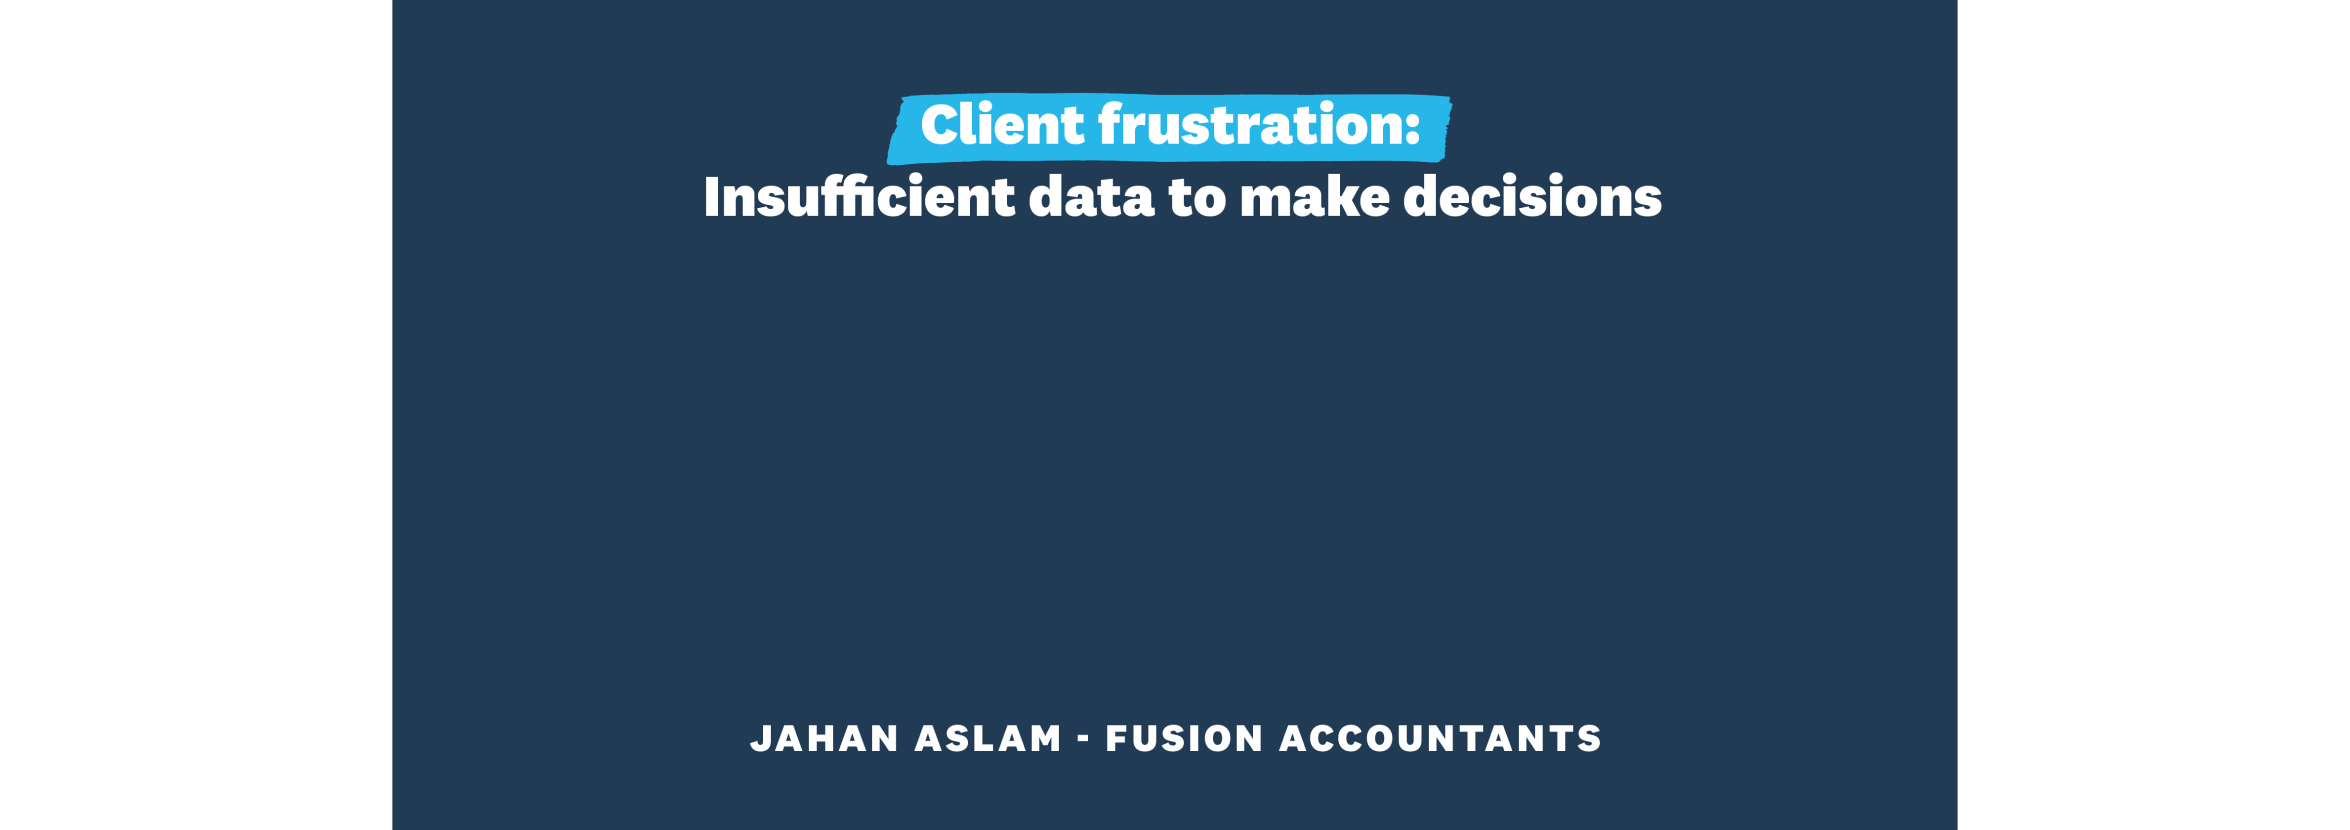 Client frustration: Insufficient data to make decisions